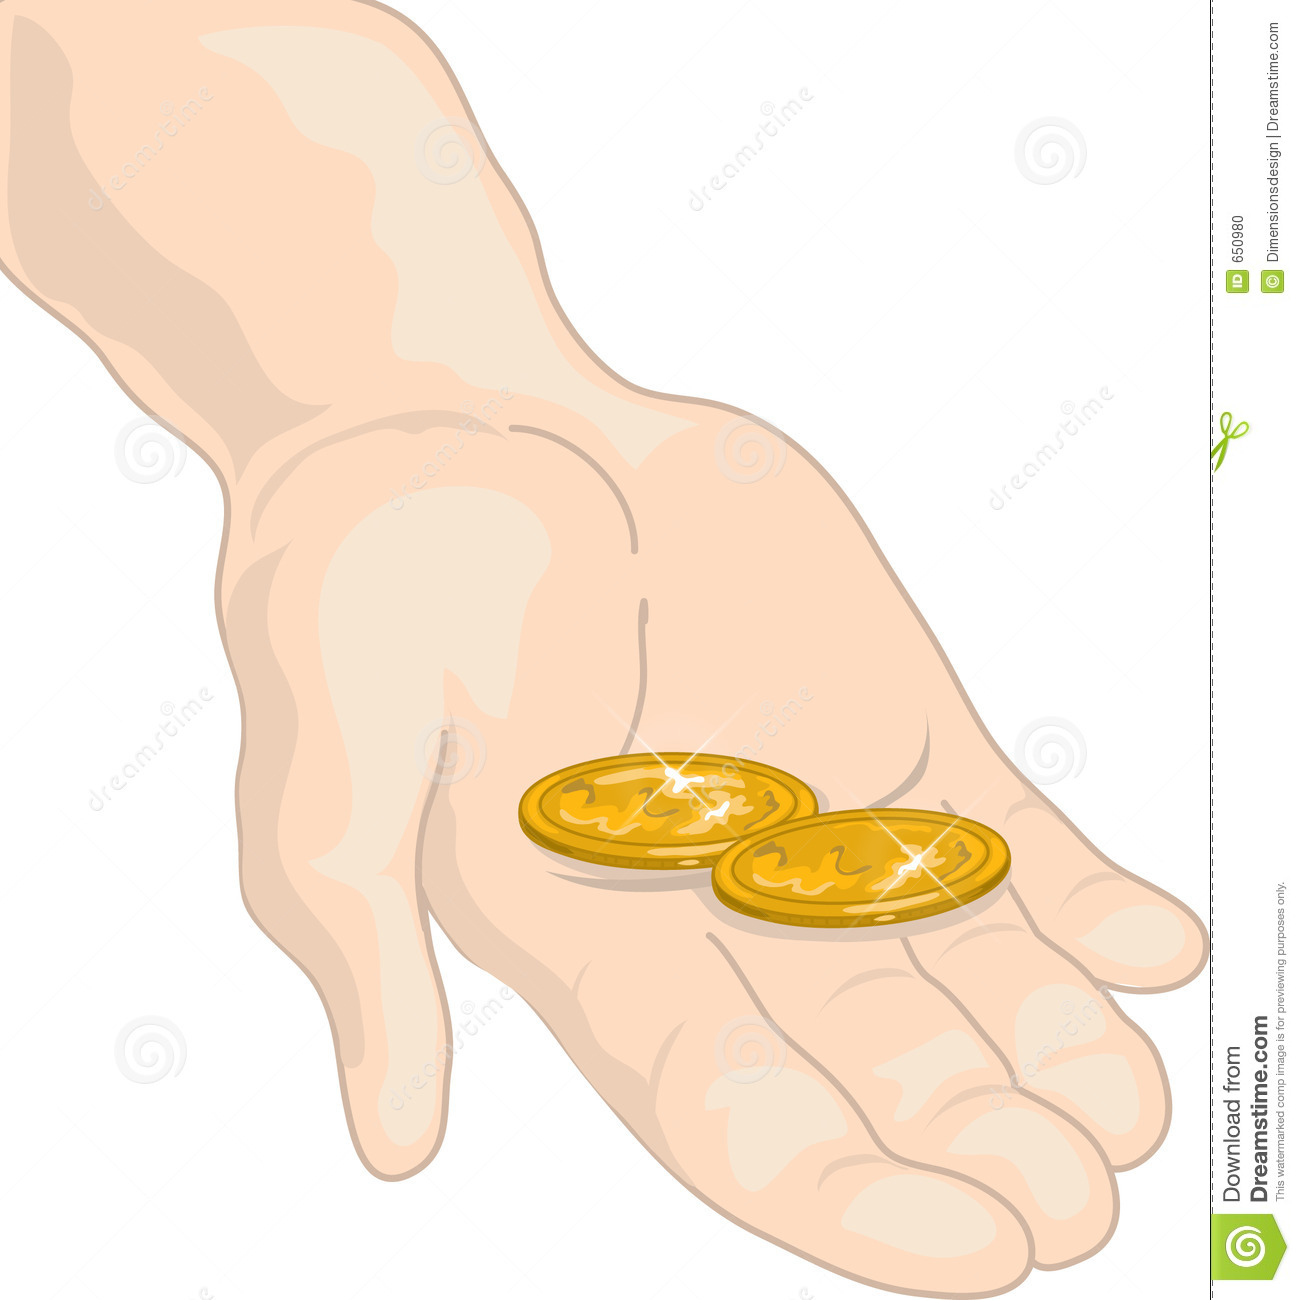 Putting In My Two Cents Stock Photo   Image  650980